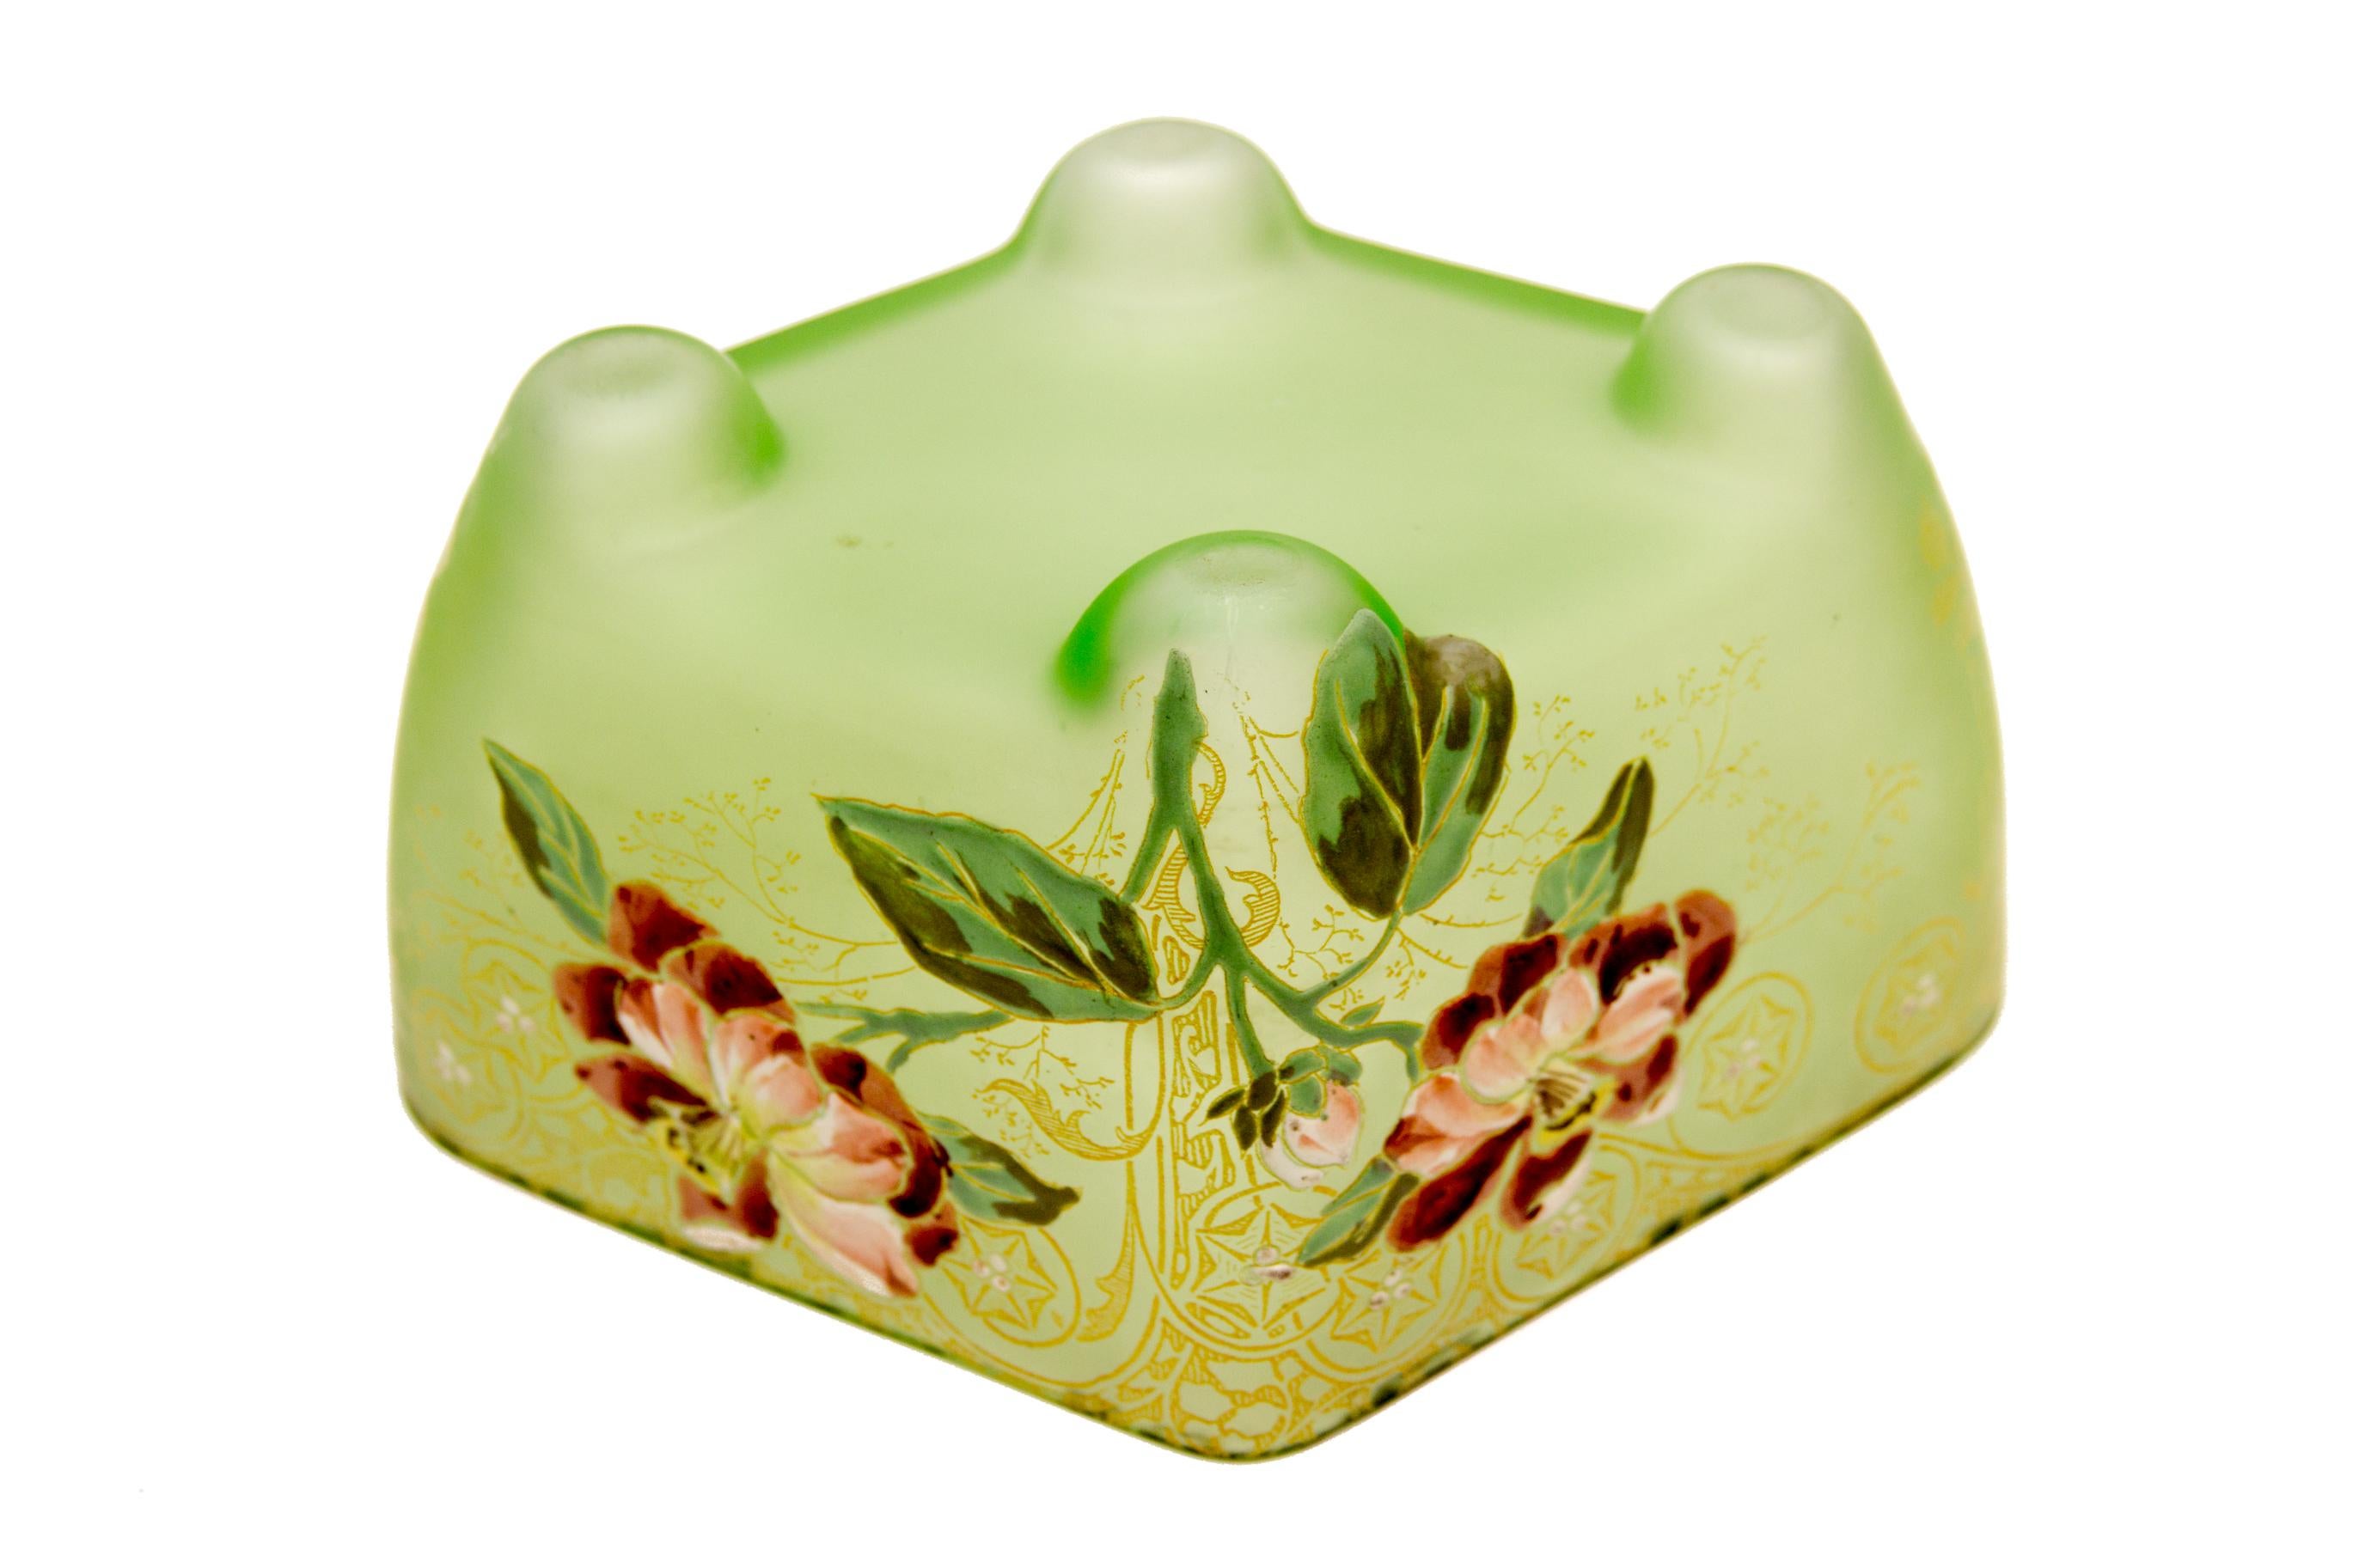 Enameled Art Nouveau Square Glass Bowl with Flowers and Ornaments